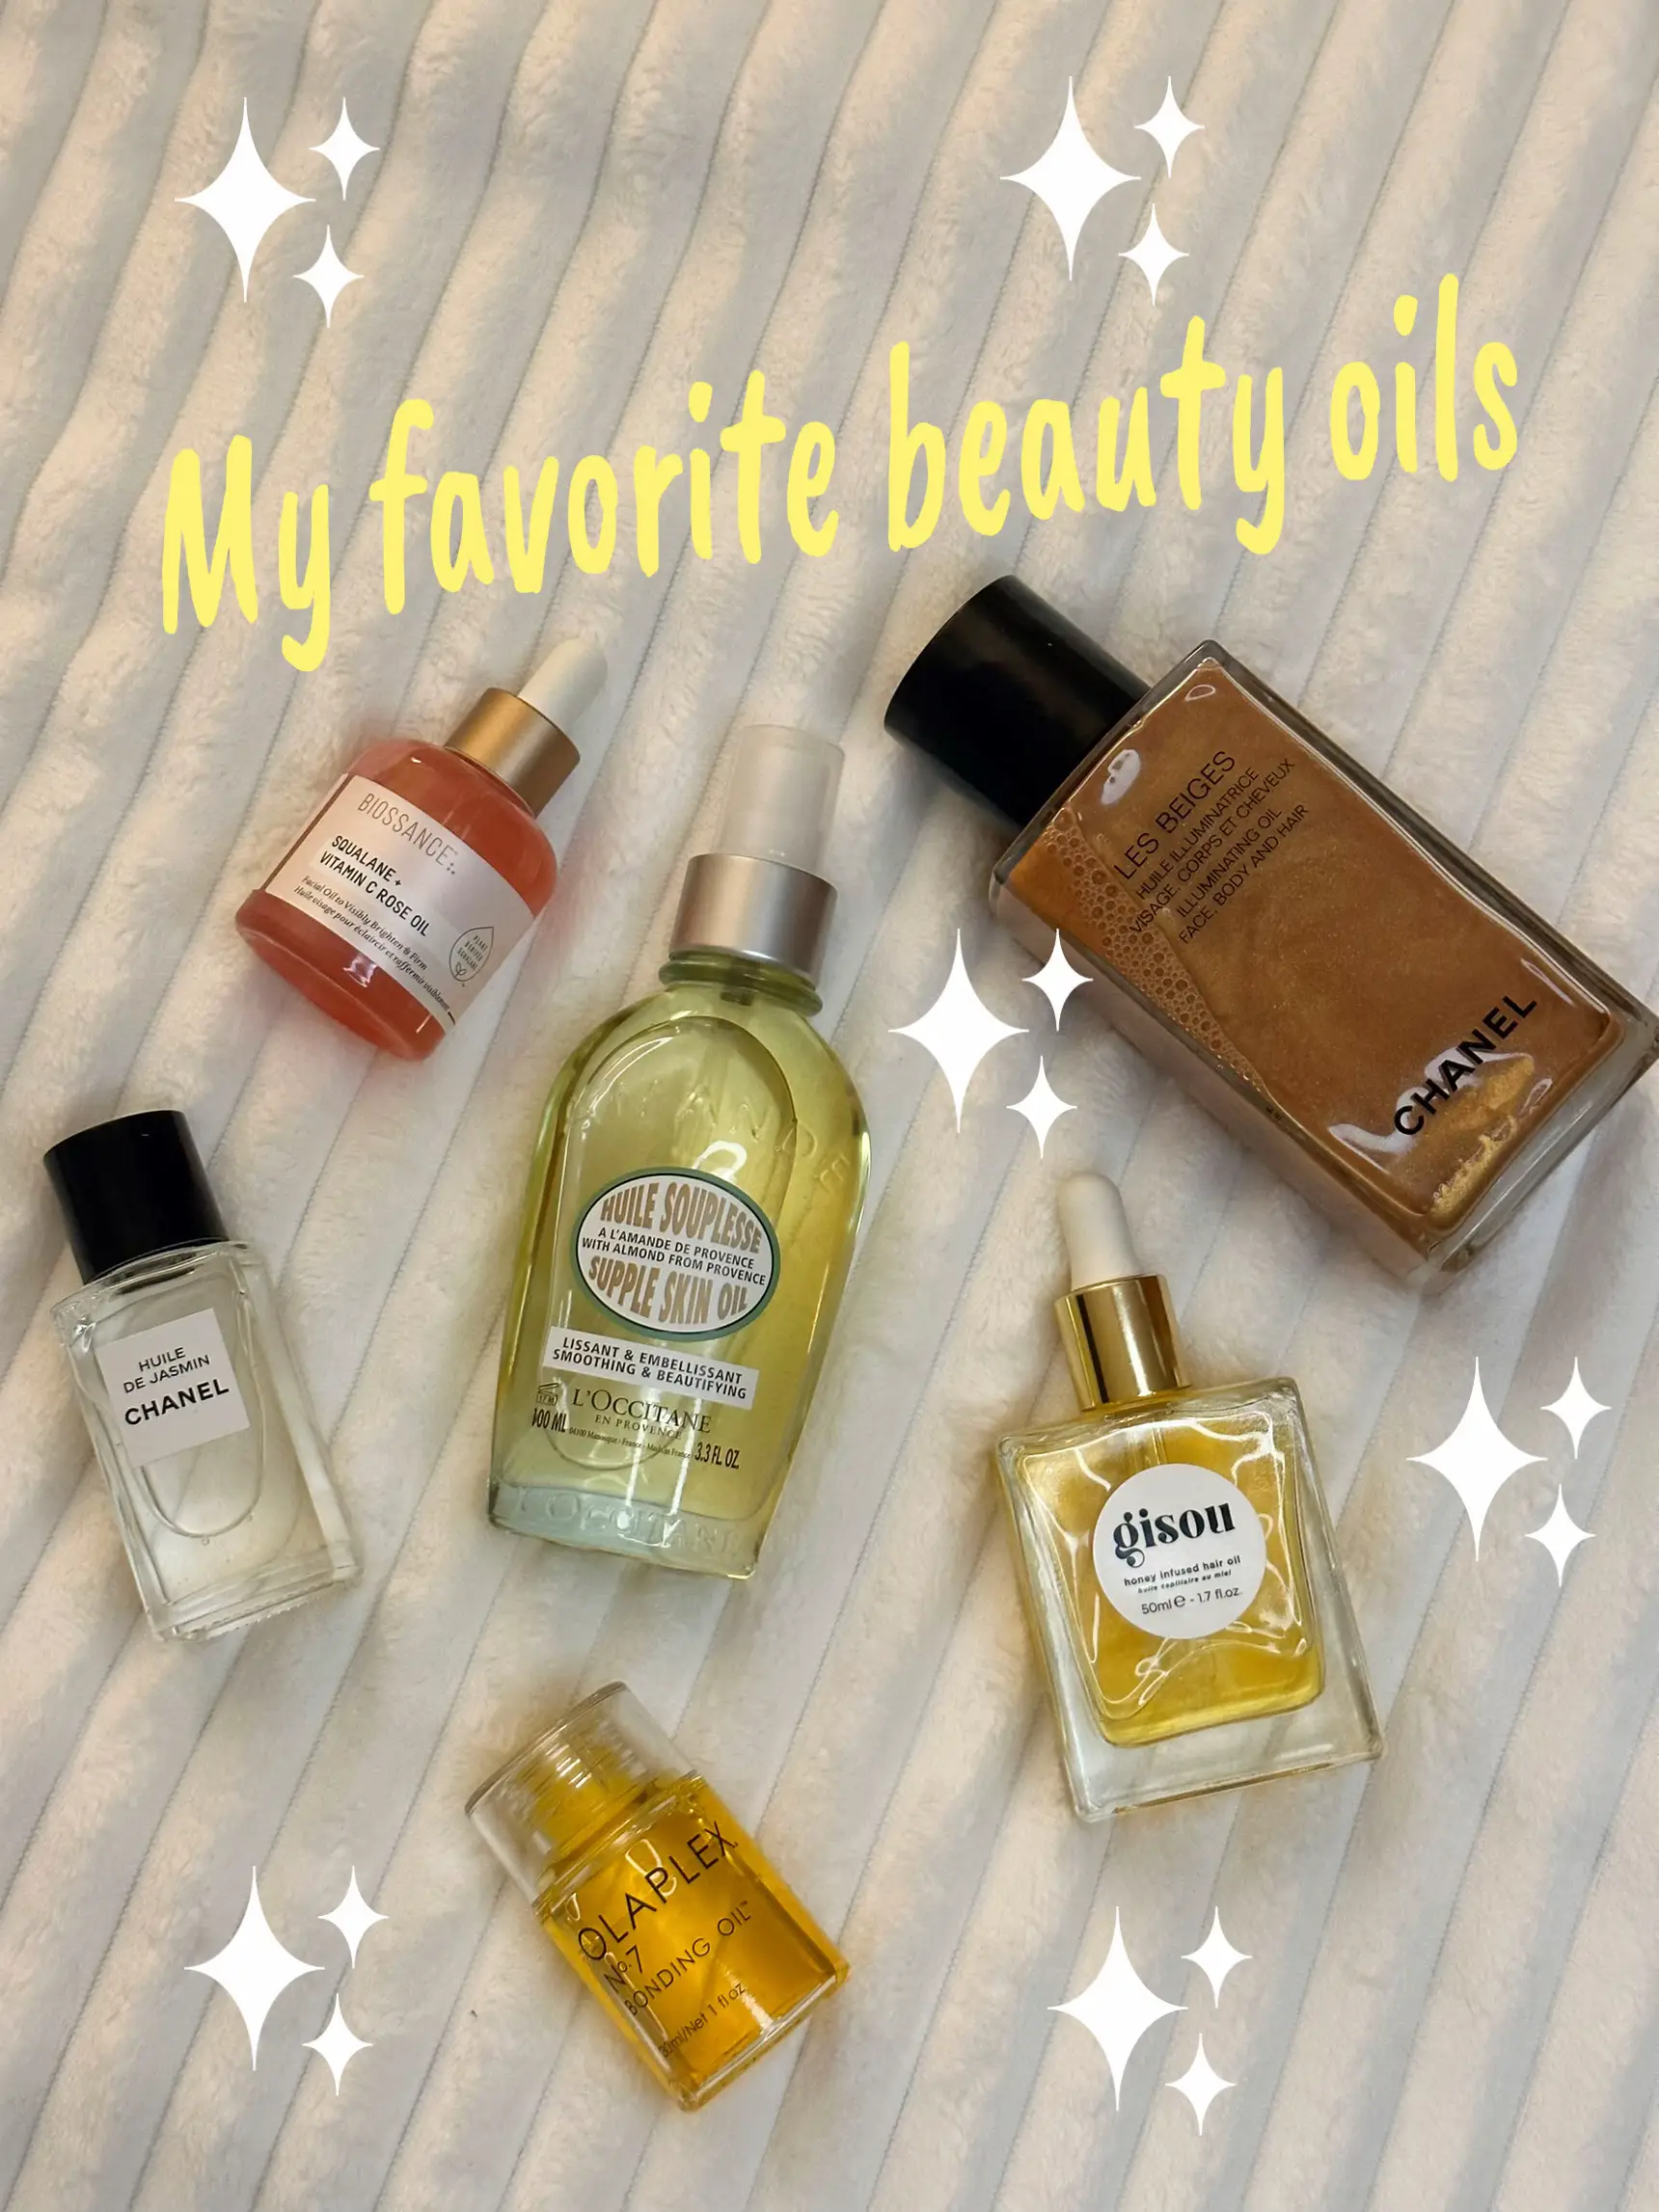 Favorite beauty oils 💛, Gallery posted by Prettywithjess